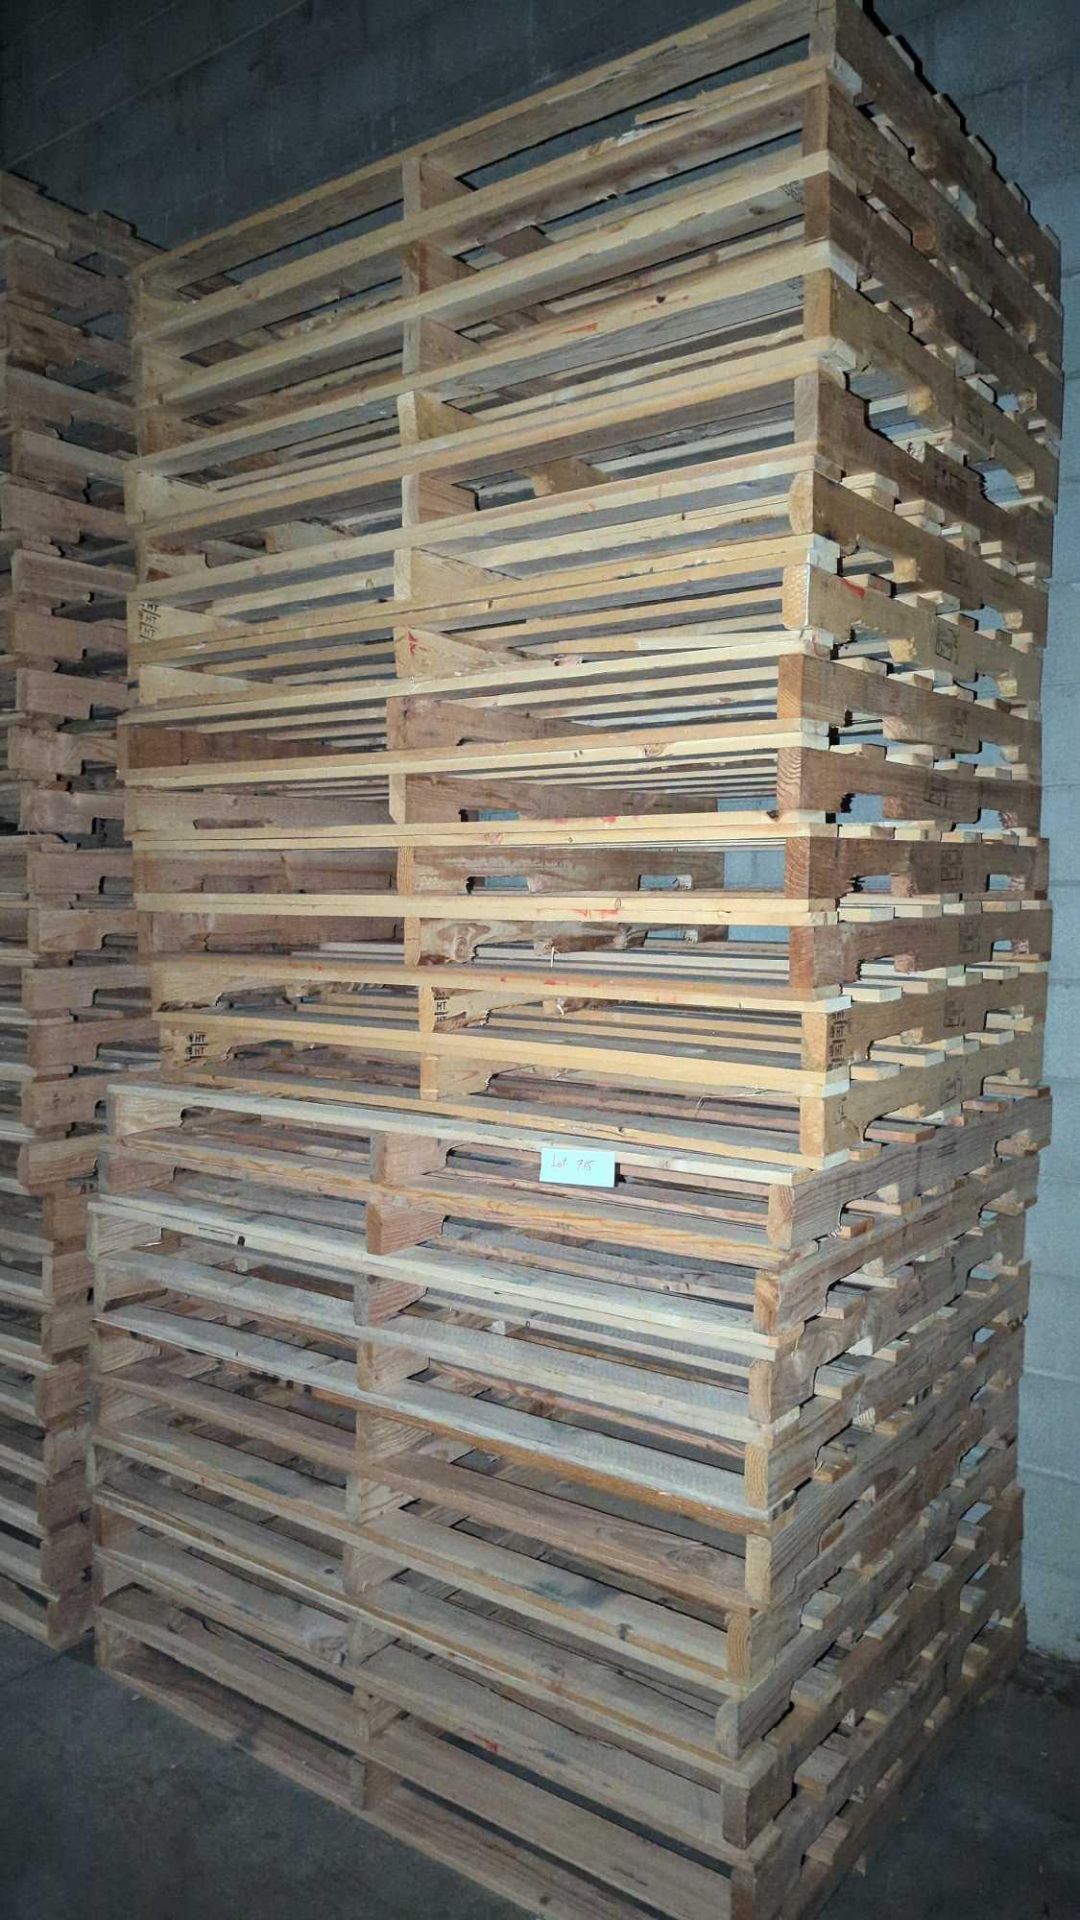 Approx 24 Pallets 40 x 60 (located in Ogden)